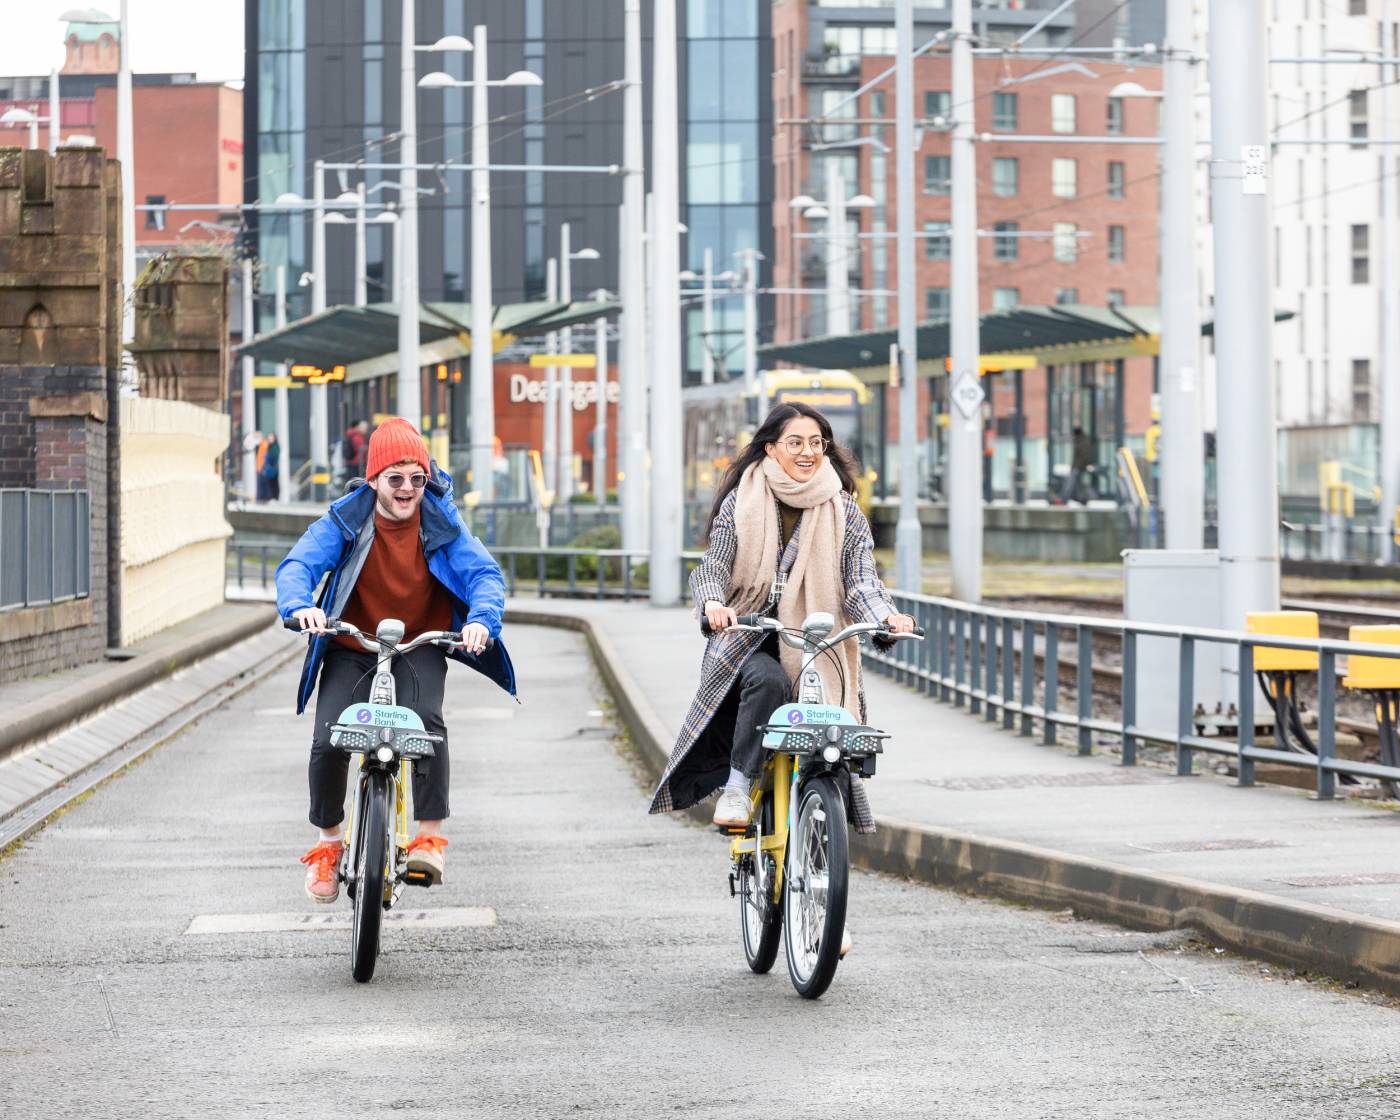 Two cyclists using starling bank bike hire in Manchester